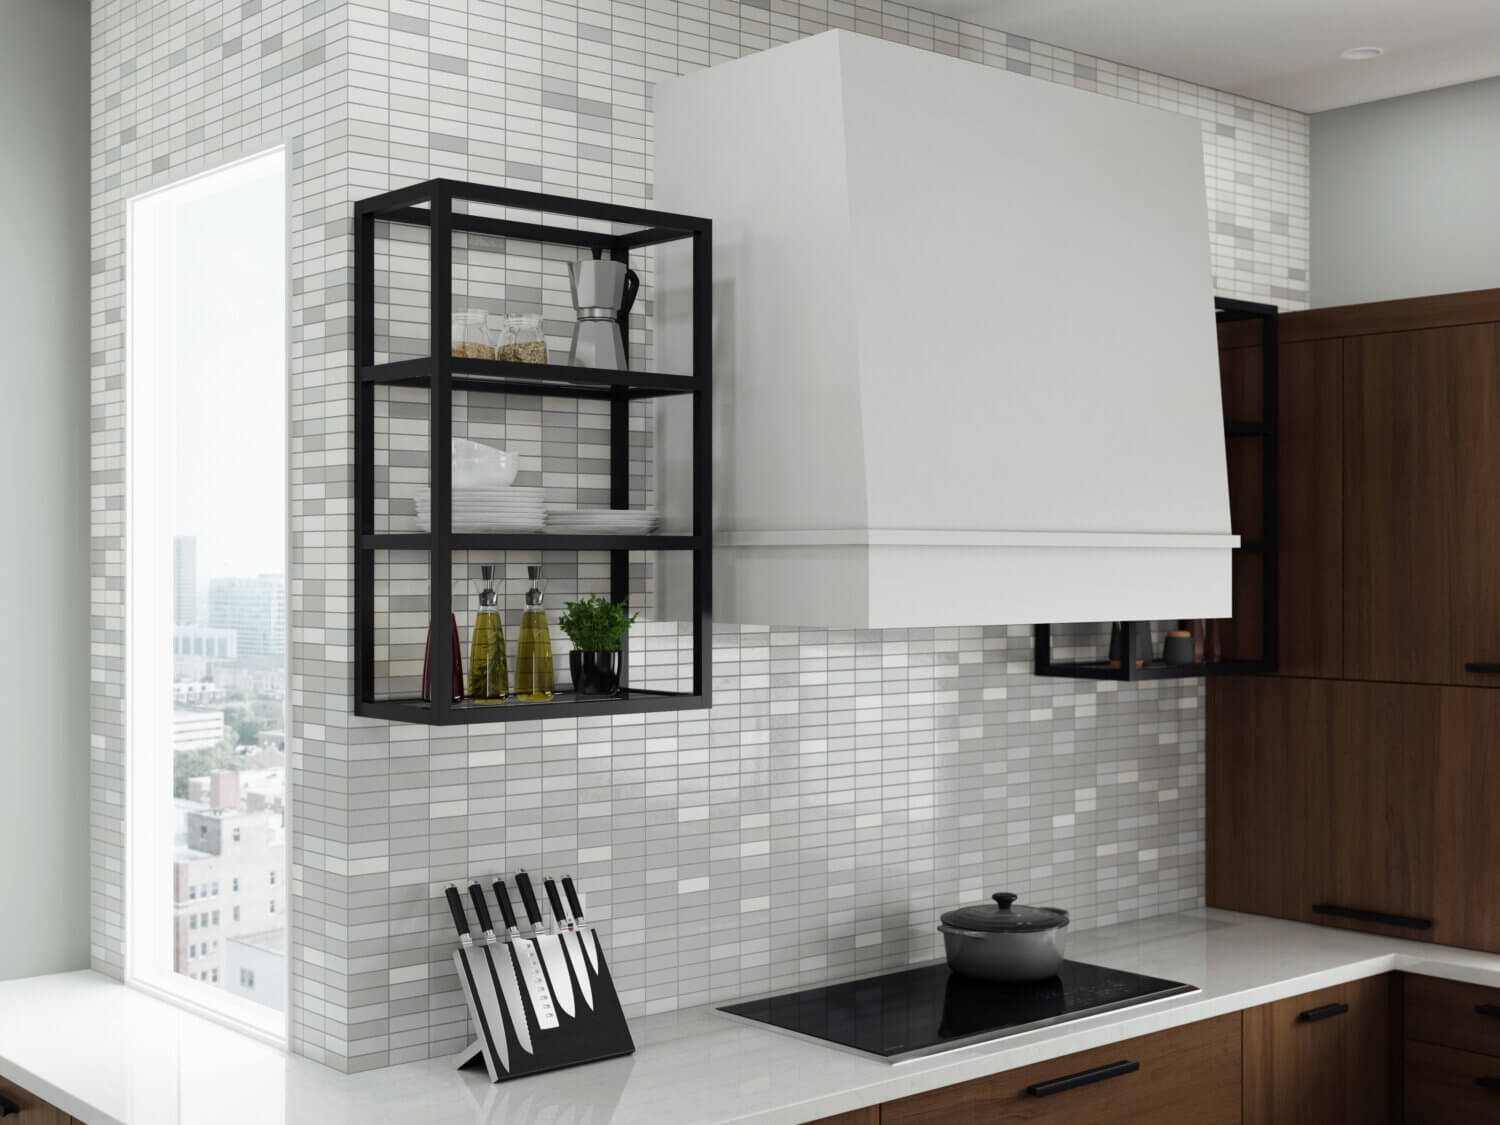 A city kitchen is remodeled with frameless cabinets, open metal shelves, and a white wood hood with a modern style.